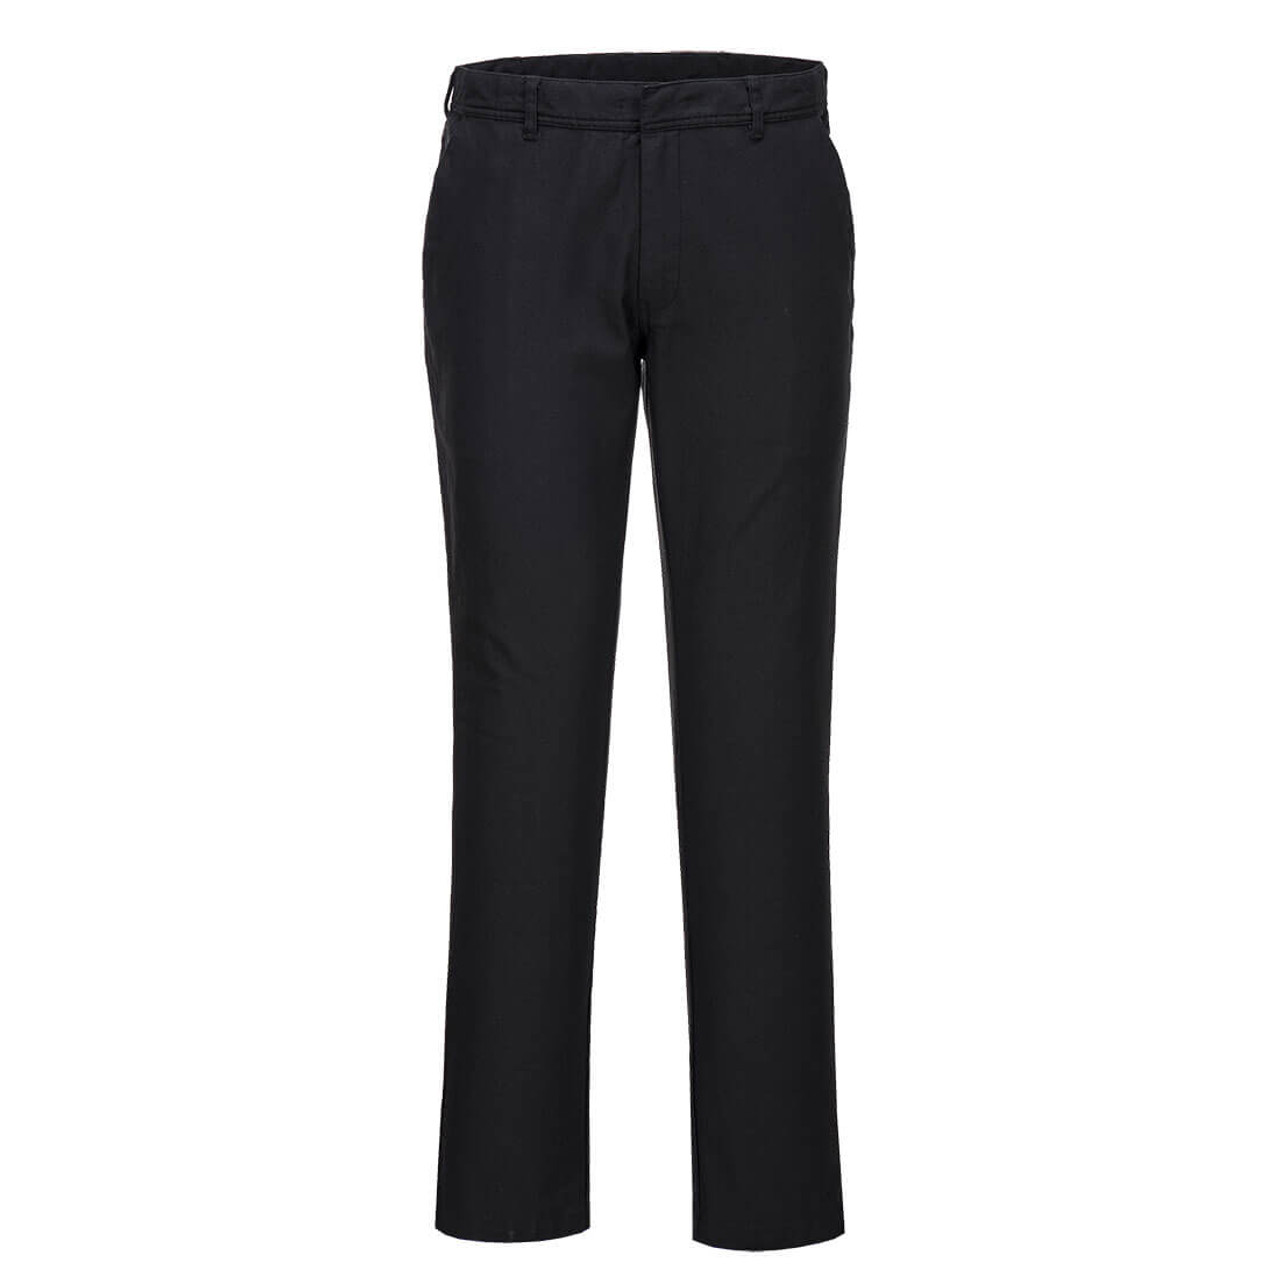 Portwest CD887 WX2 Women's Stretch Work Trousers - Size: 26 to 38